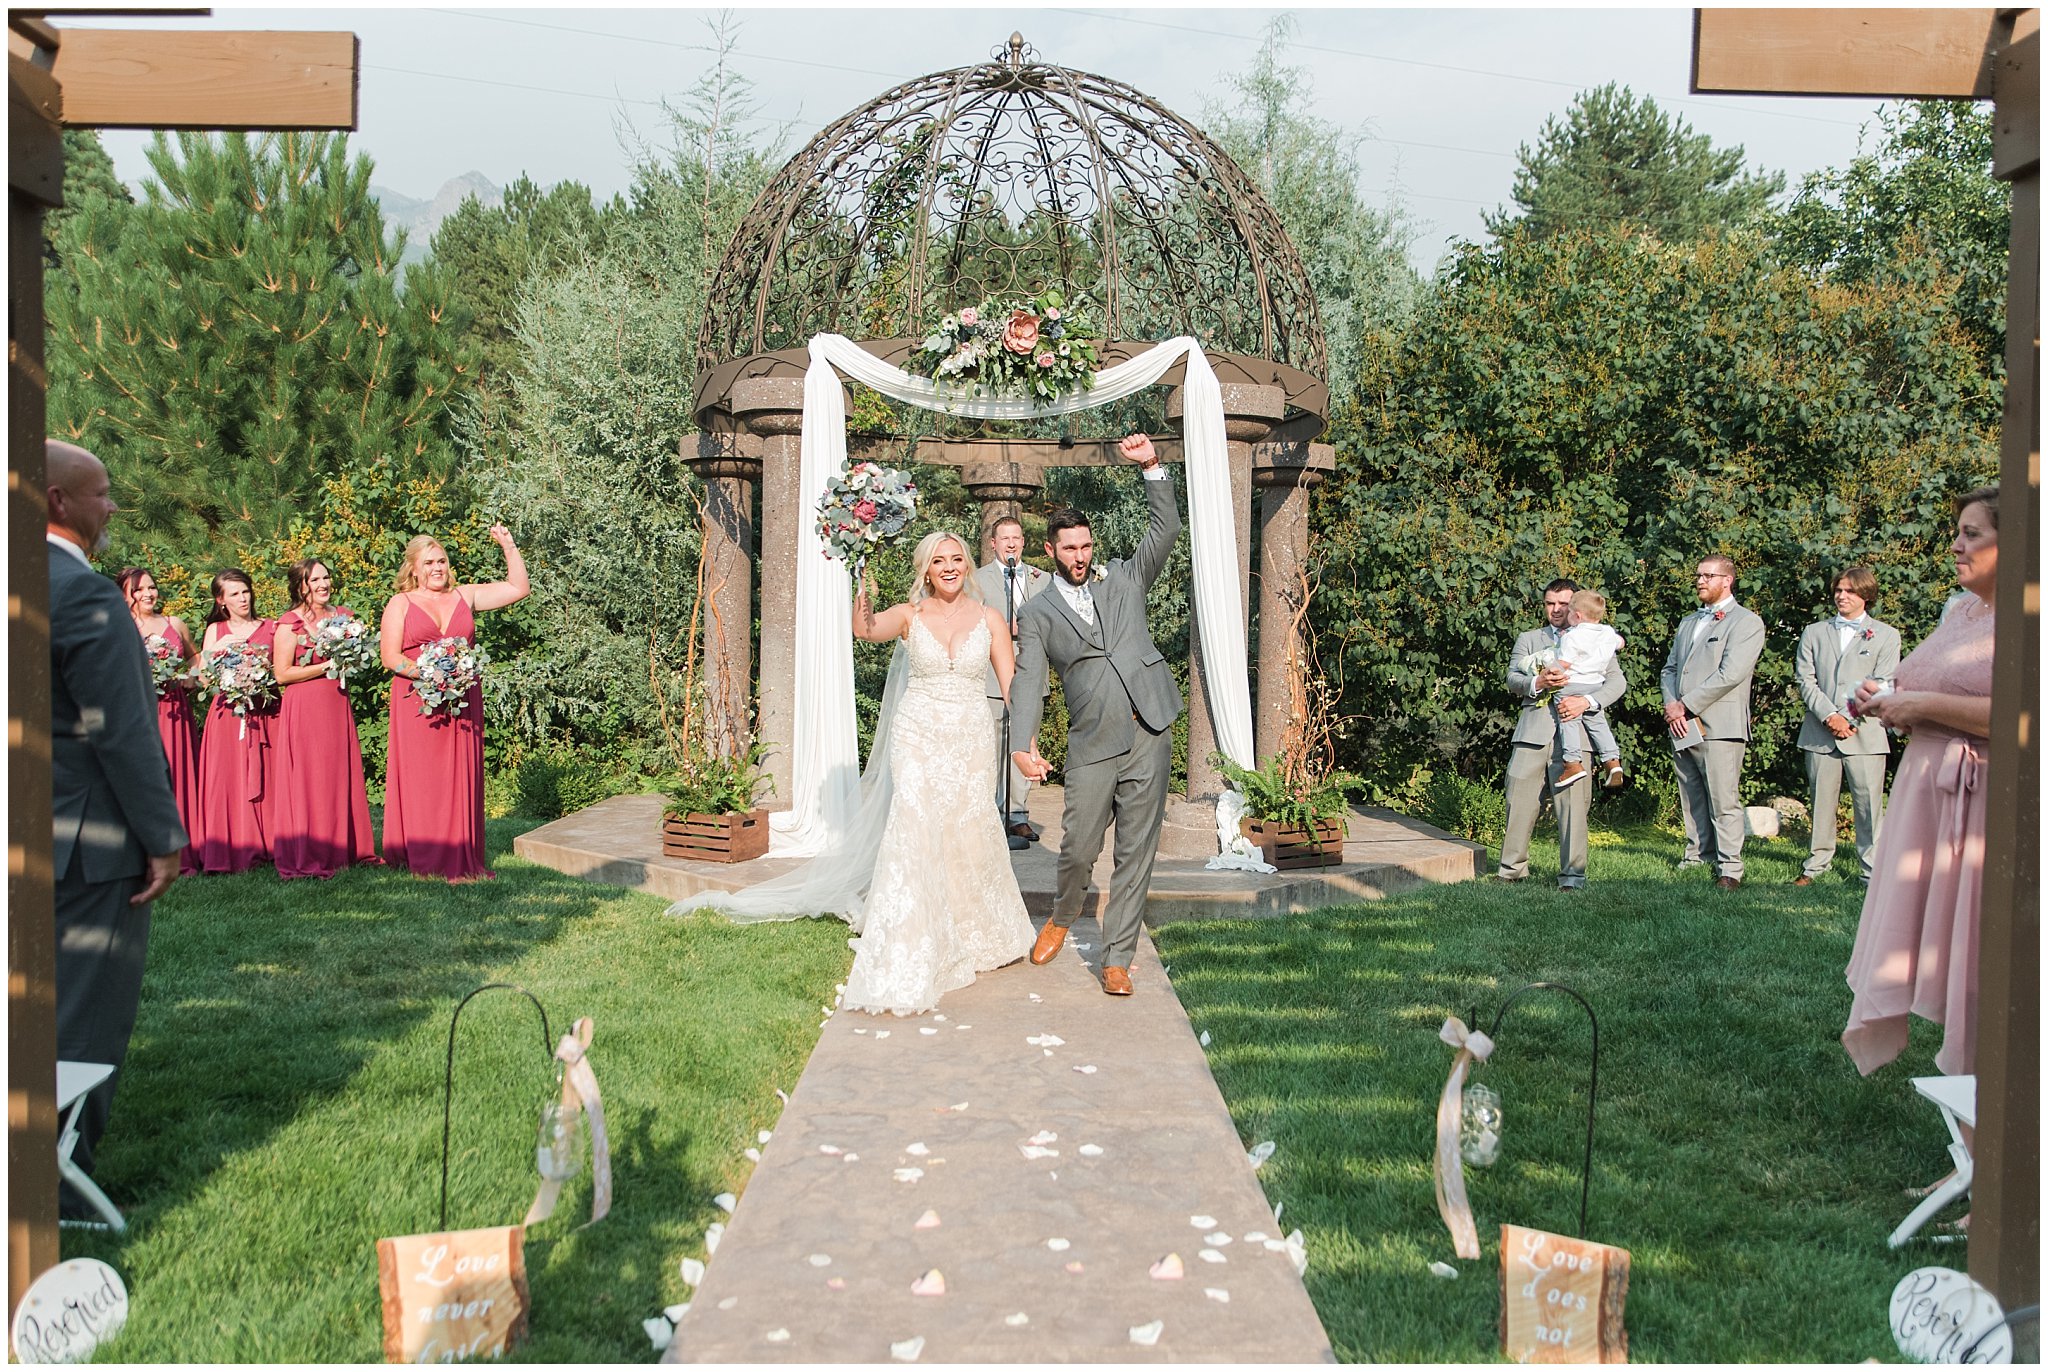 Bride and Groom celebrate after wedding ceremony | Dusty Blue and Rose Summer Wedding at Oak Hills Utah | Jessie and Dallin Photography